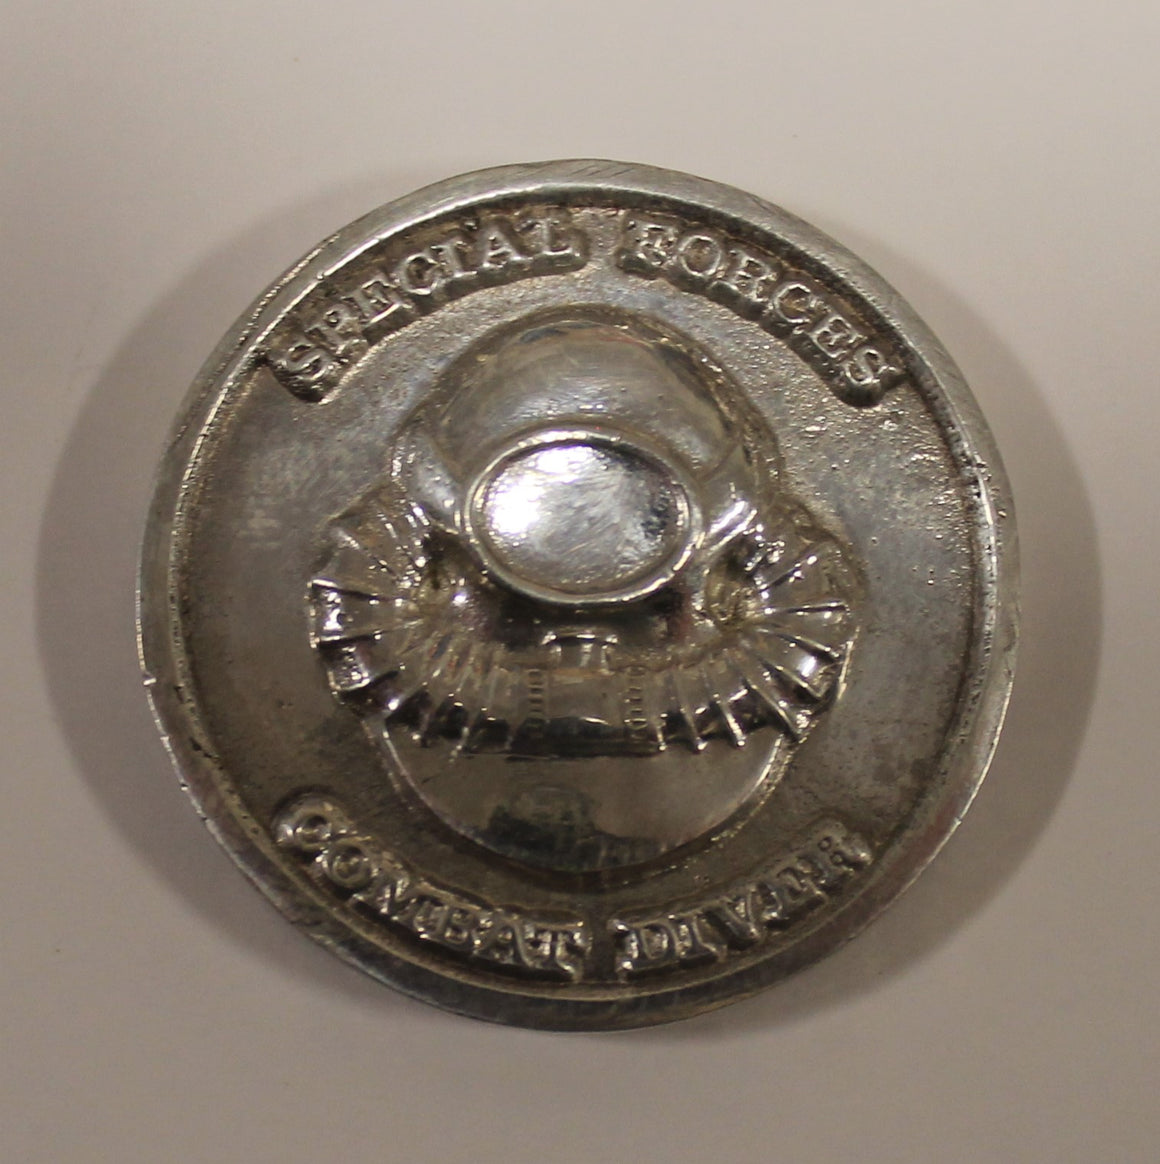 Silver Challenge Coin – Rolyat Military Collectibles